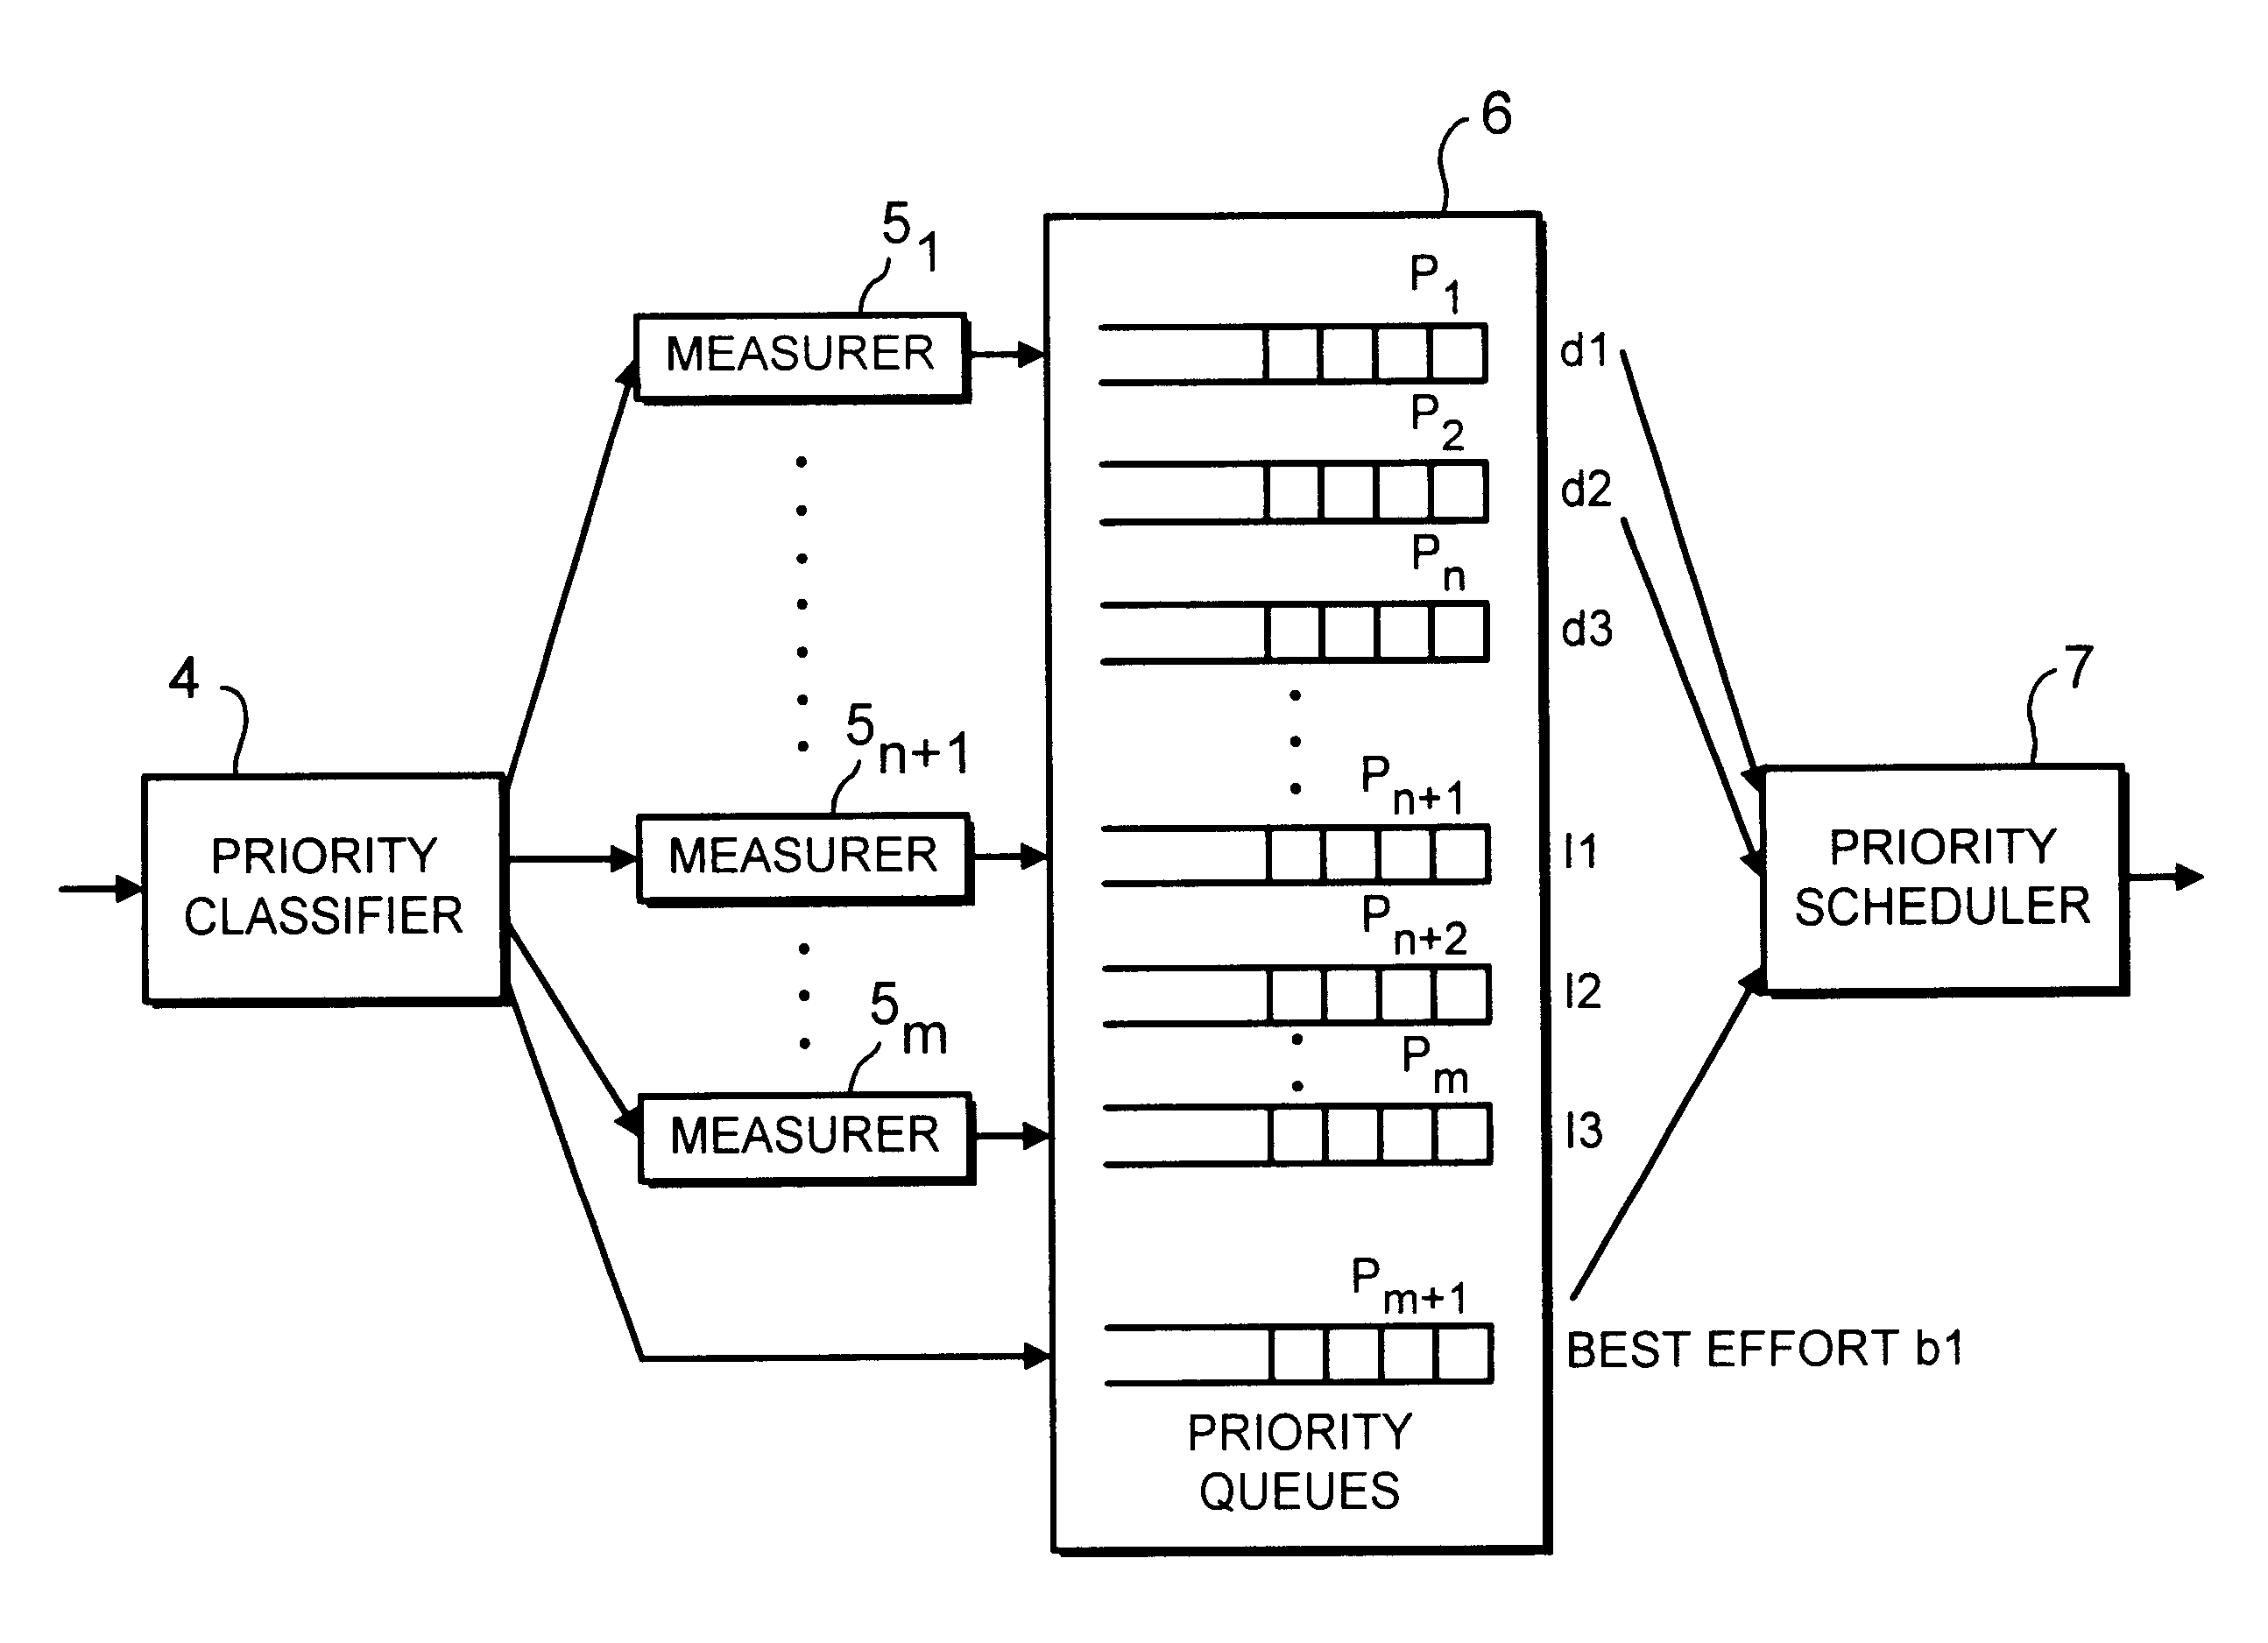 Architecture for integrated services packet-switched networks